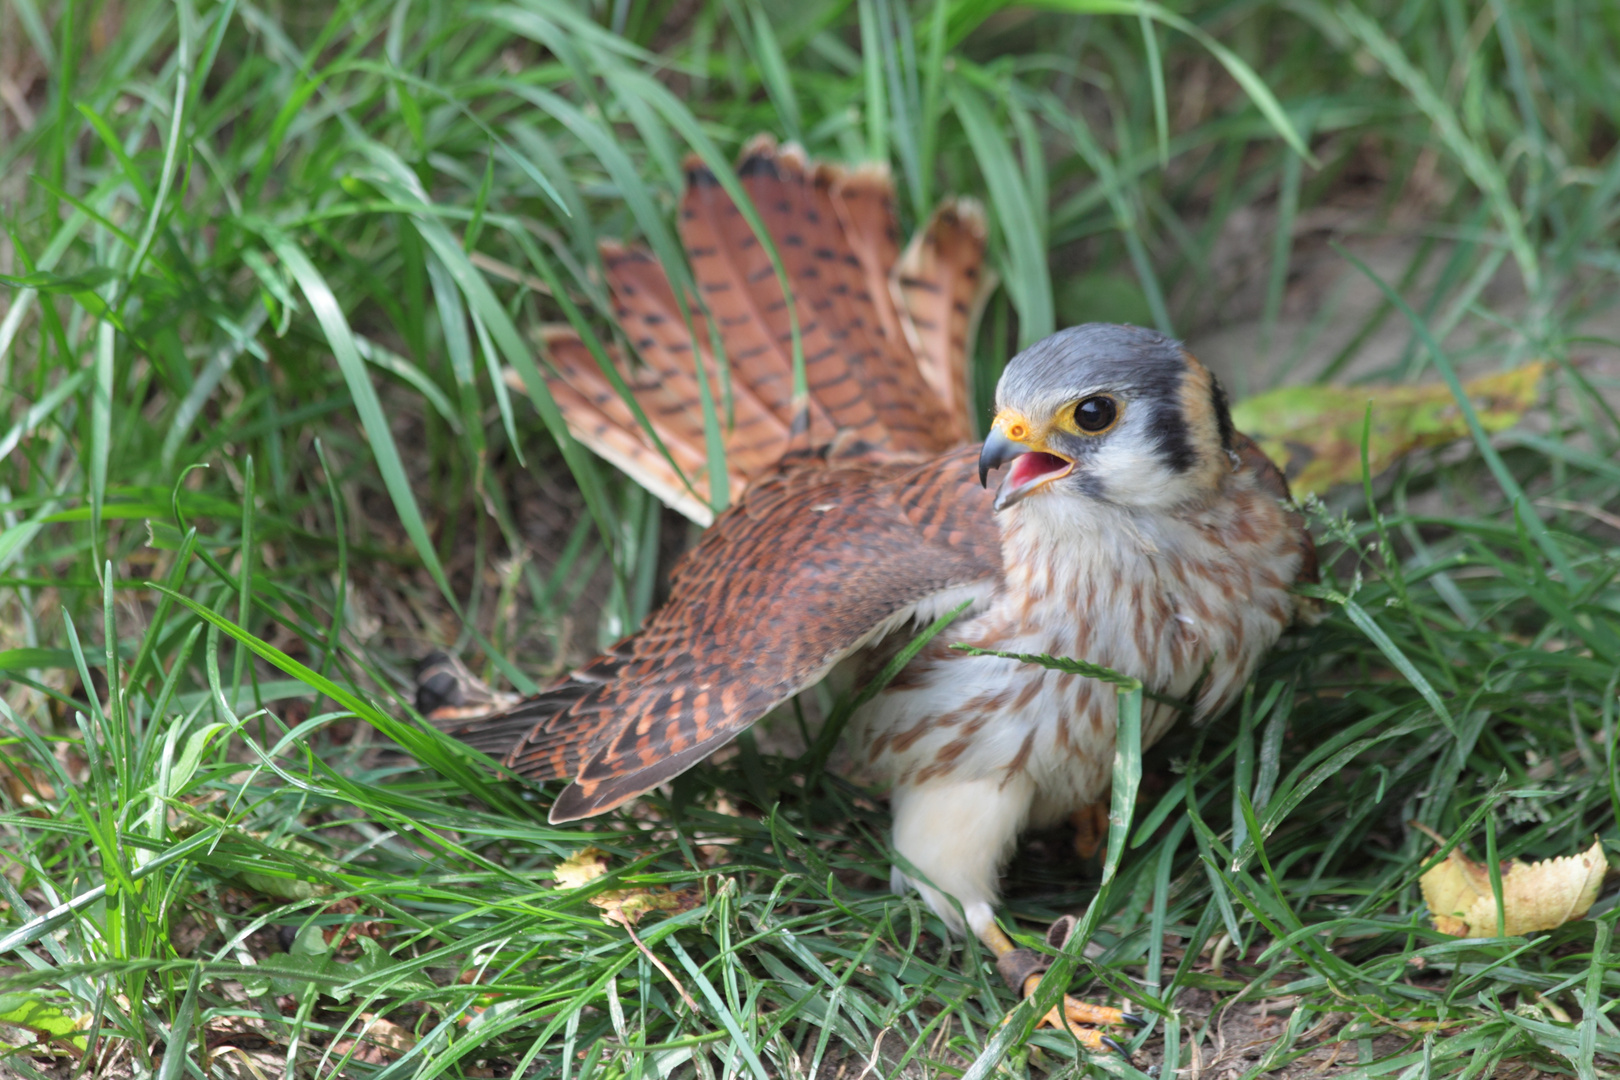 Falcon on the ground